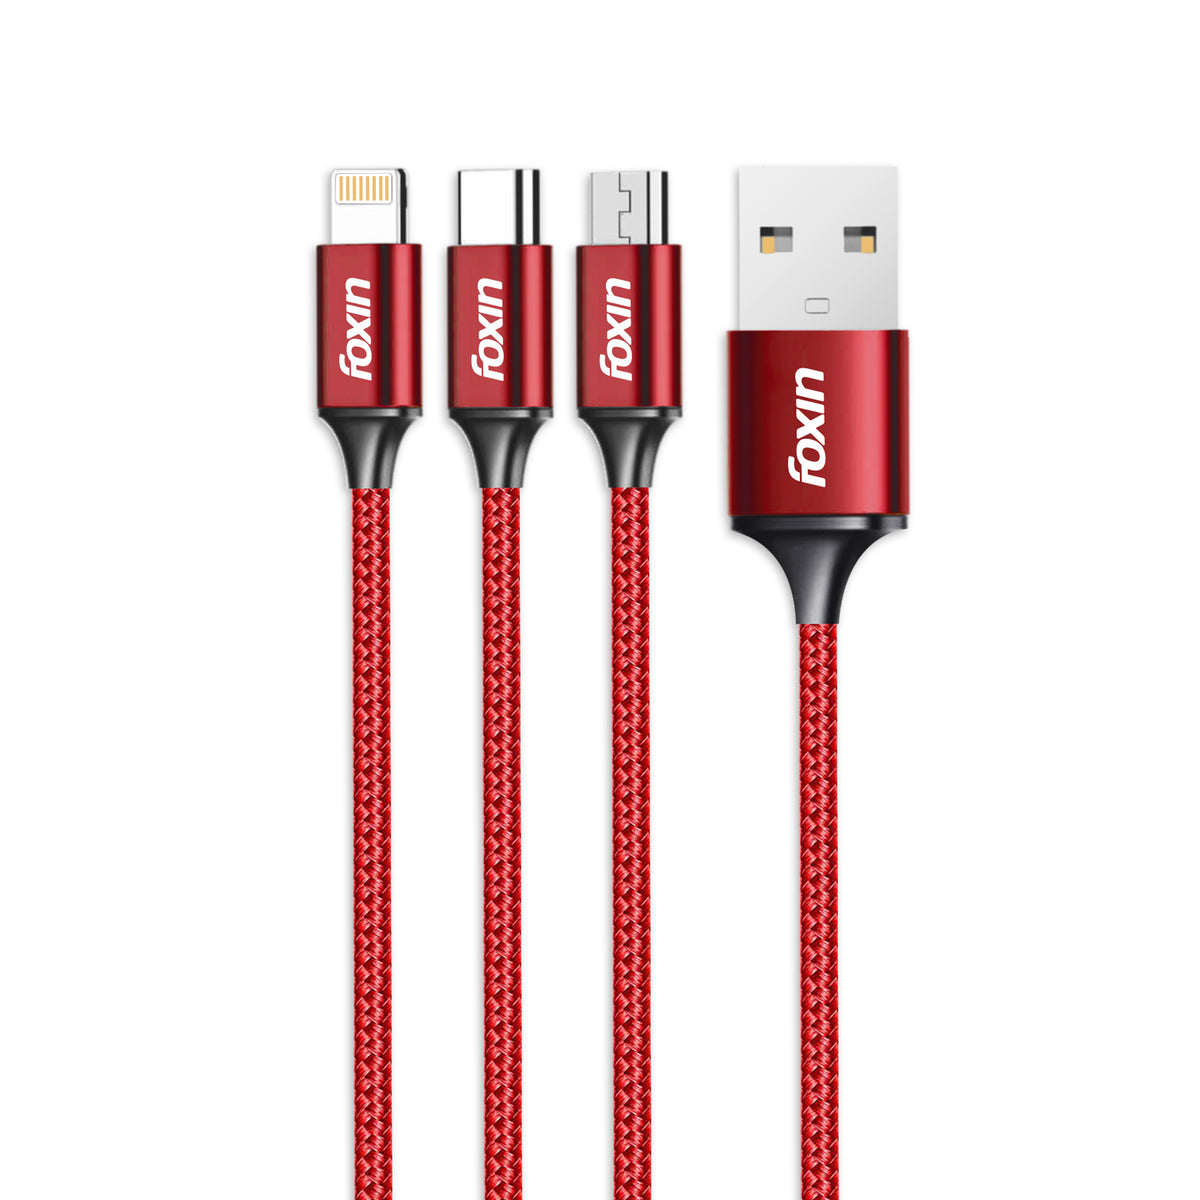 Foxin FDC-MAC03 3-in-1 USB Cable 1.2m | Up to 3.0A Current | Alloy Metal Shell | Kevlar Braided | BIS Certified | 6-Month Warranty | Red Colour